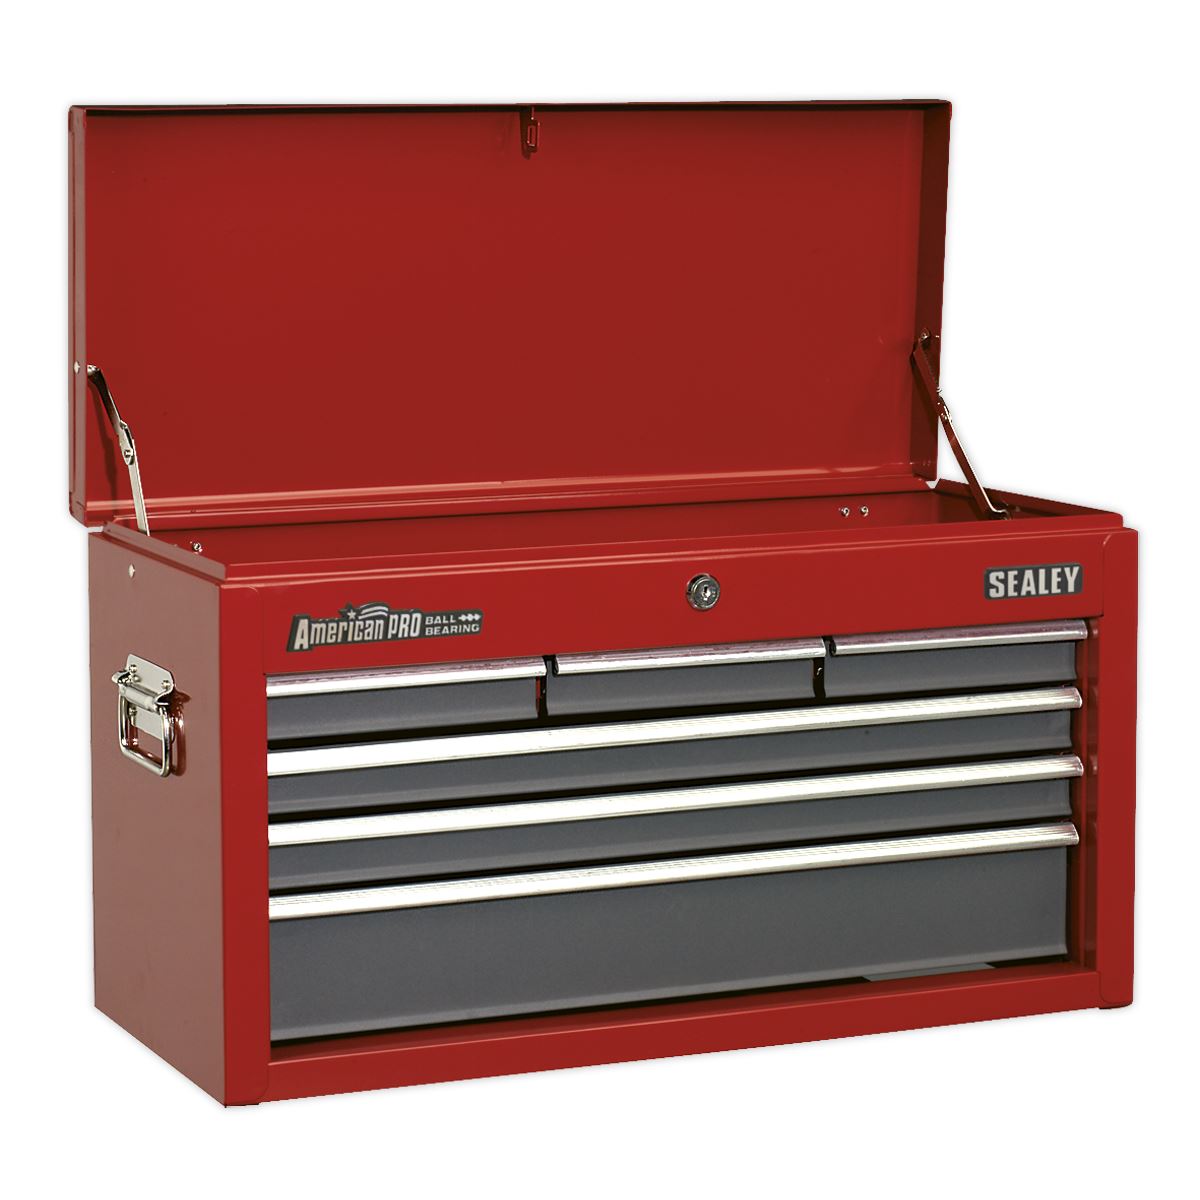 Sealey American Pro Topchest 6 Drawer with Ball-Bearing Slides - Red/Grey